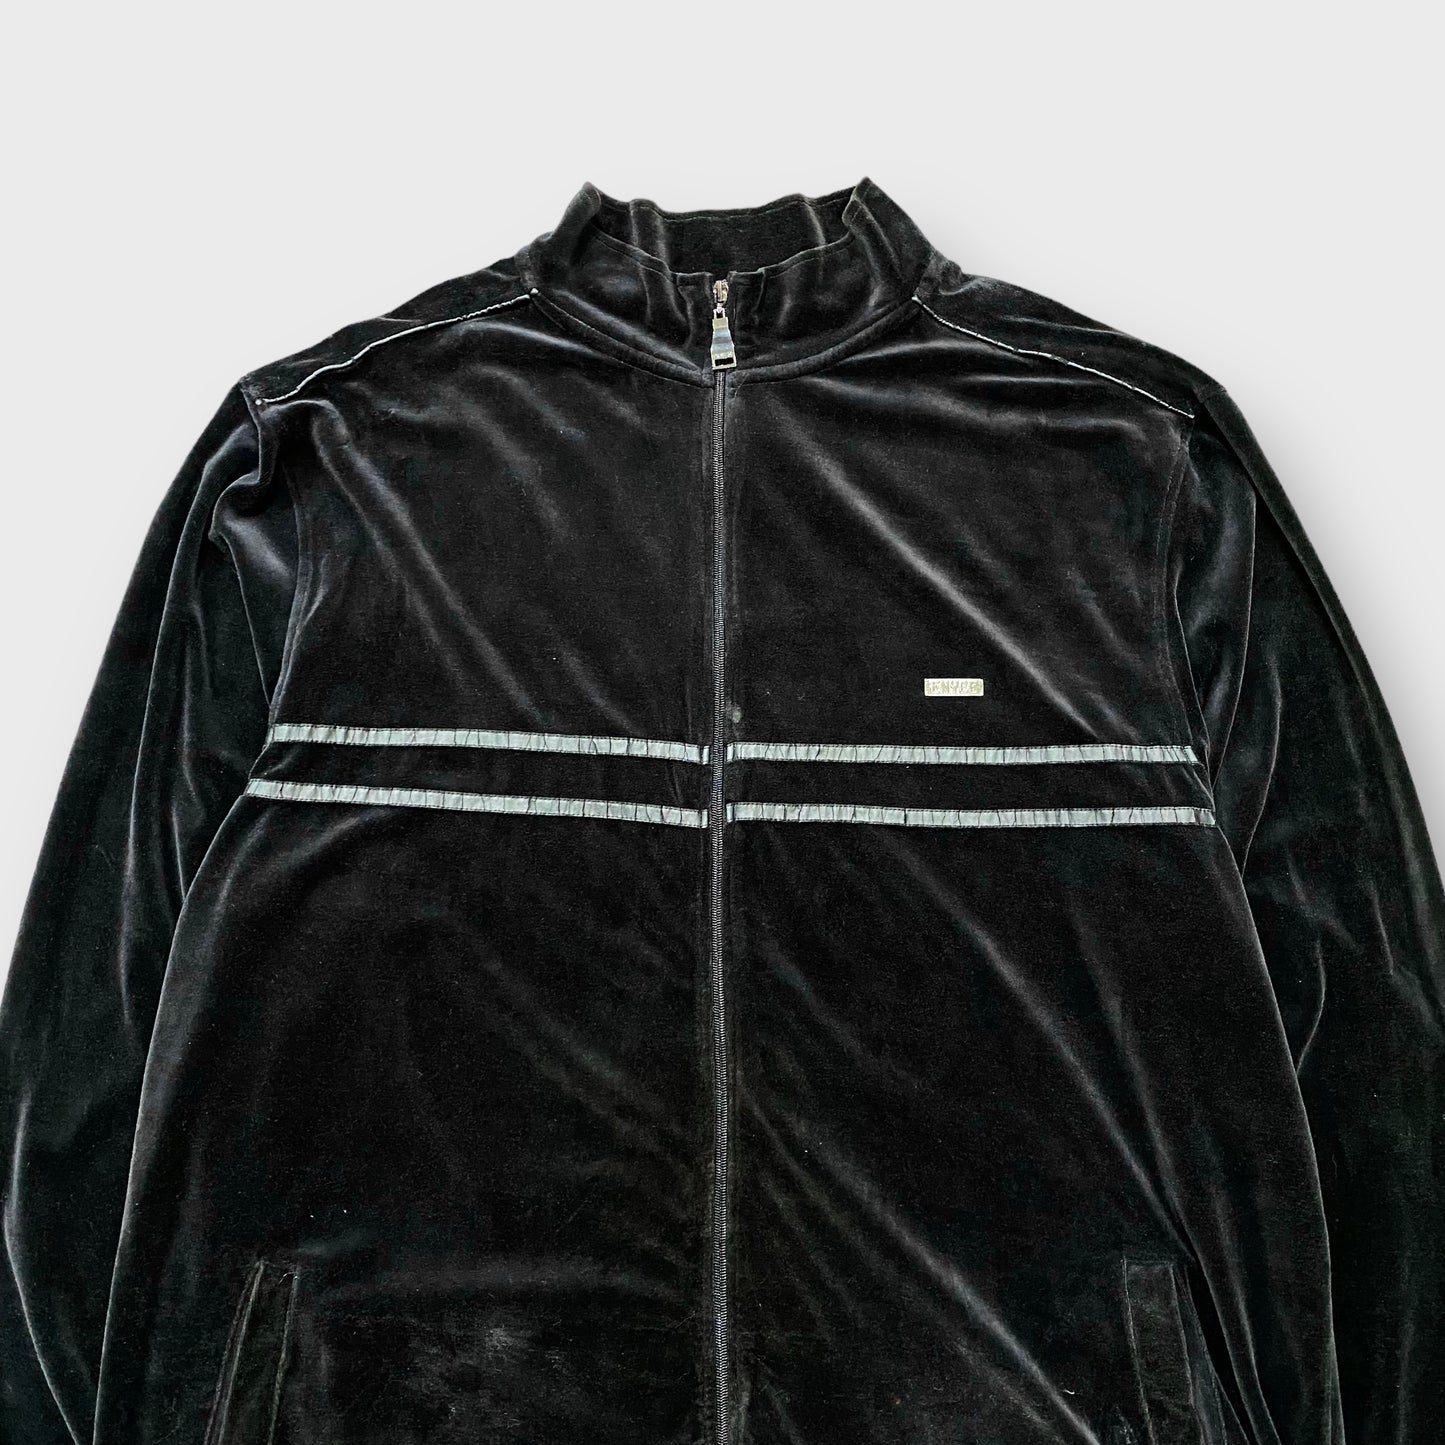 "ENYCE" Over sized velour track jacket